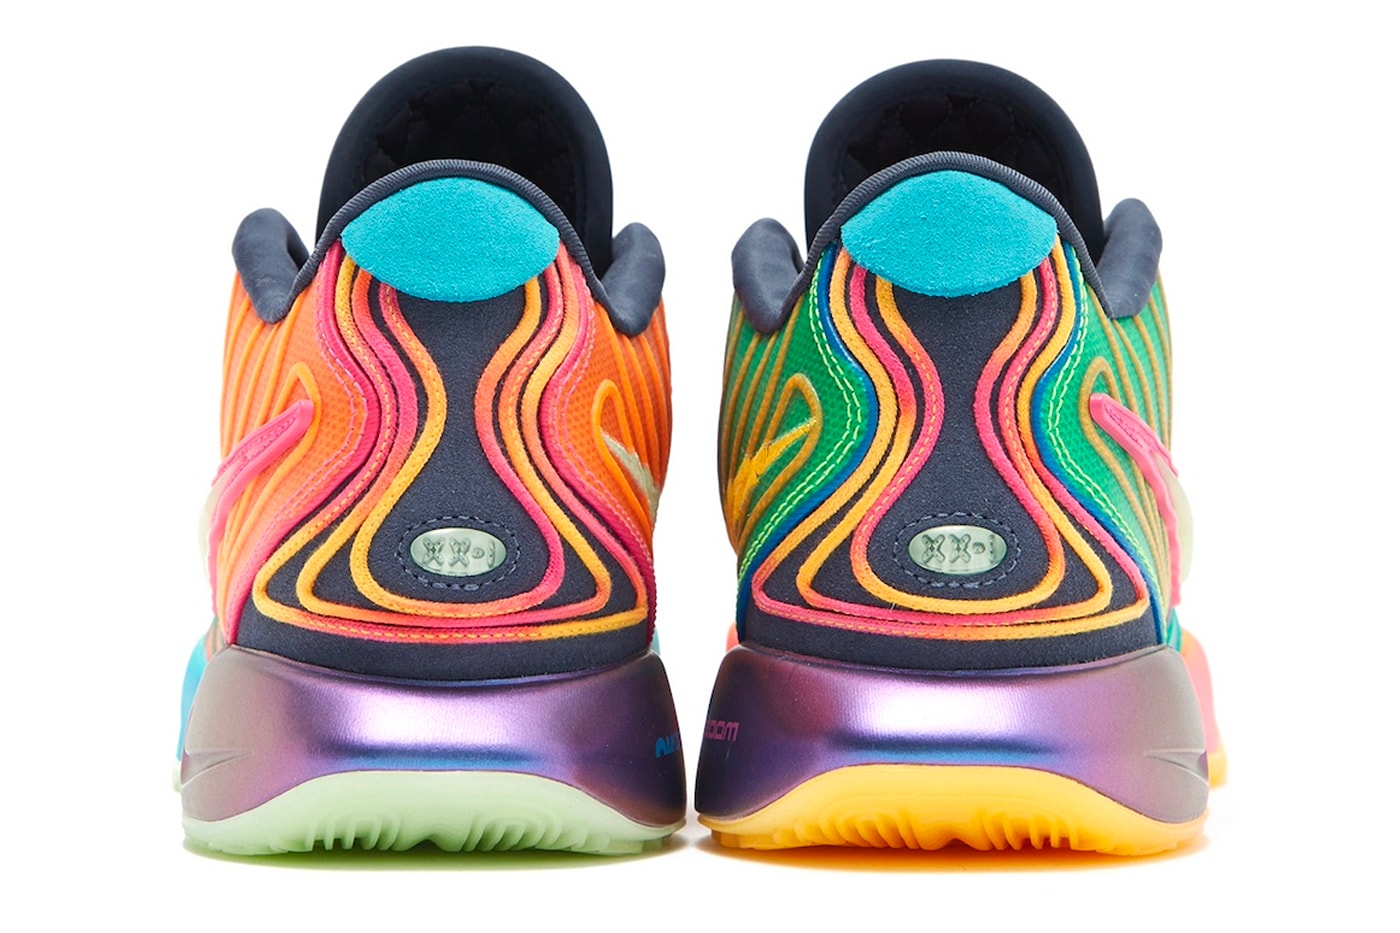 Take a Look at the Nike LeBron 21 "Multi-Color" HF5353-400 king james basksetbal llos angeles lakers shoes 